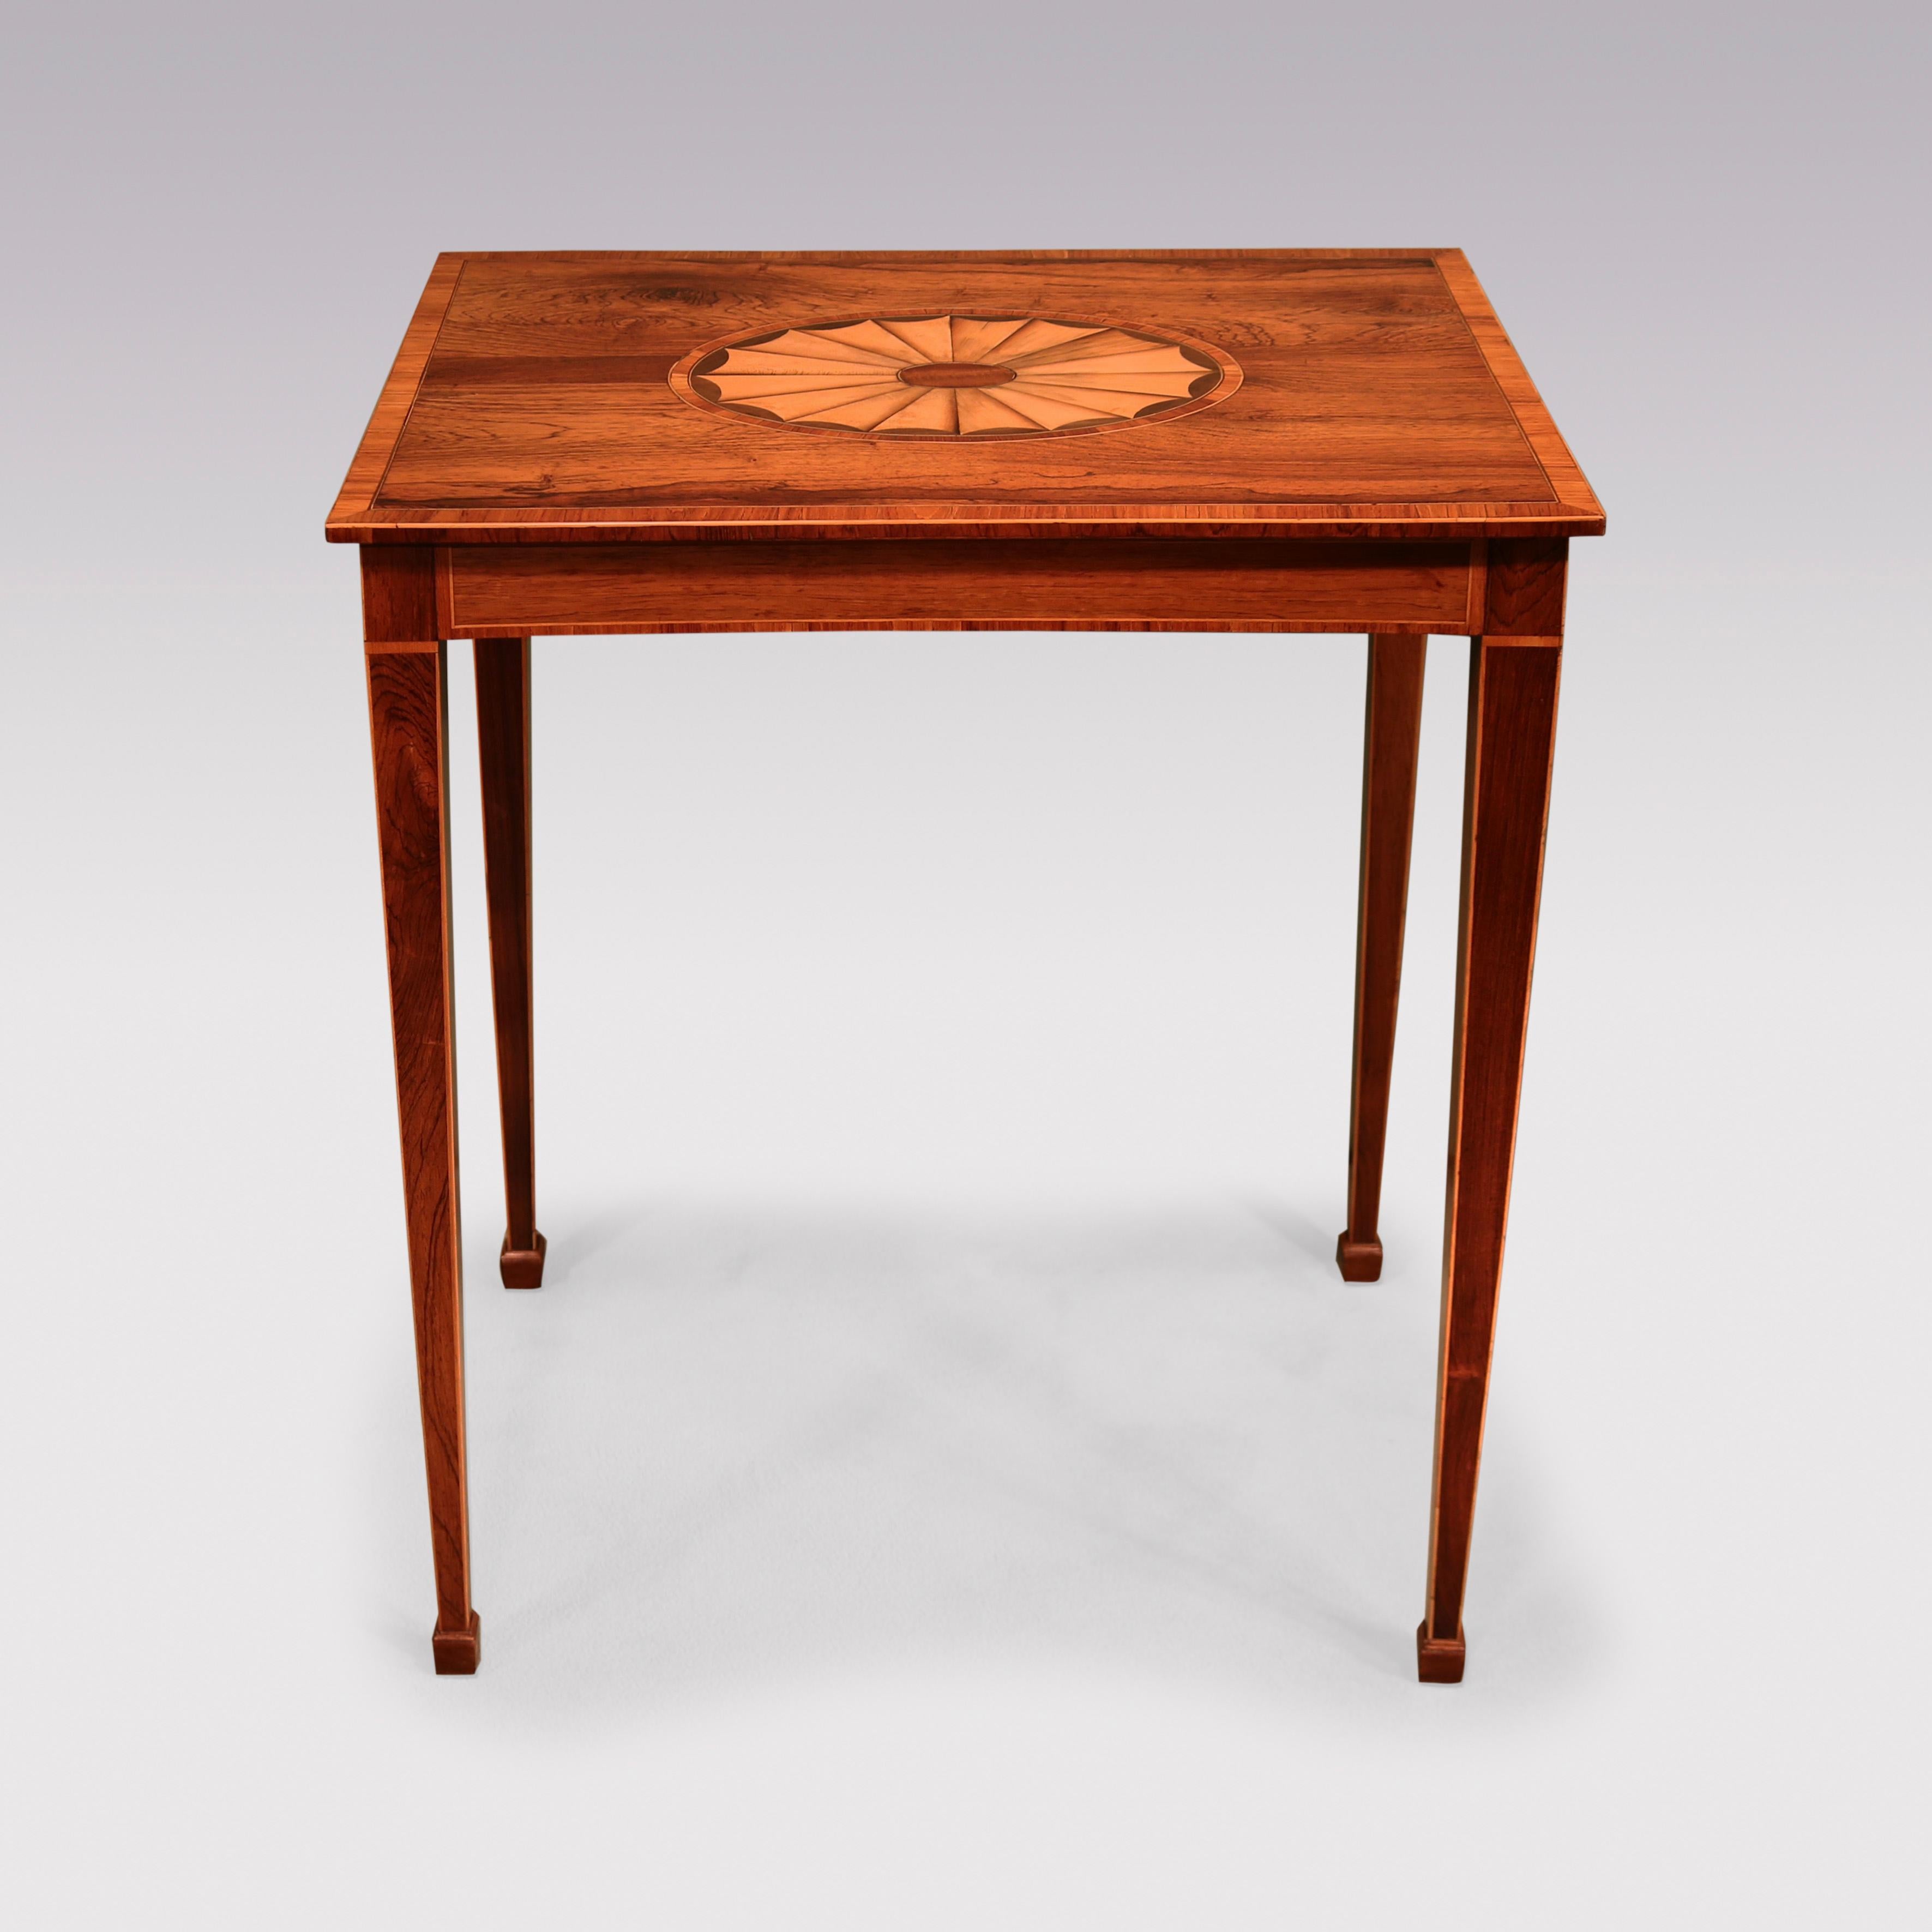 A late 18th Century rosewood Occasional Table, boxwood string throughout, having tulipwood crossbanded rectangular top with central fan inlaid oval panel, supported on square tapering legs ending on block feet. (repairs to centre oval).